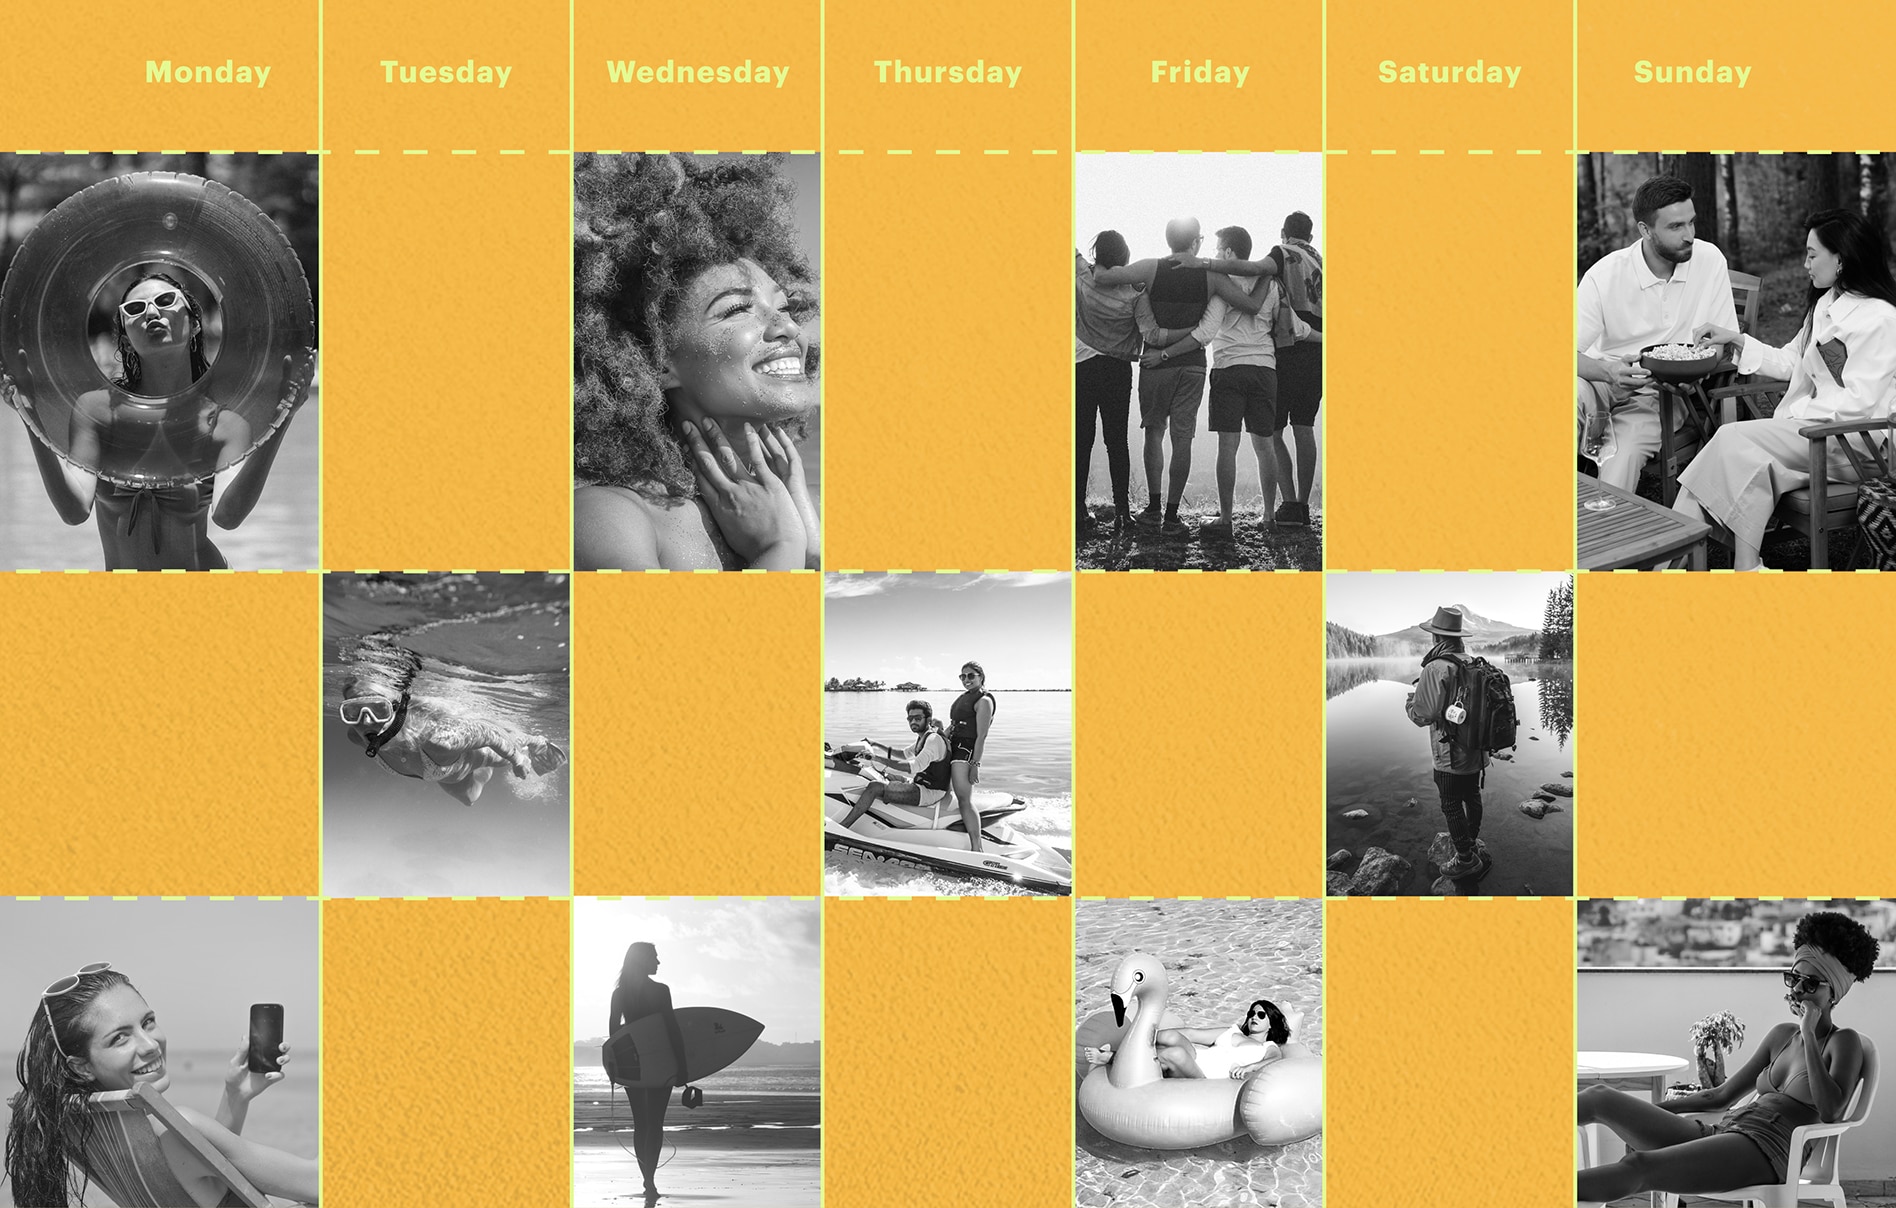 A week-view calendar with a collage of vacation photos filling the hours of each day